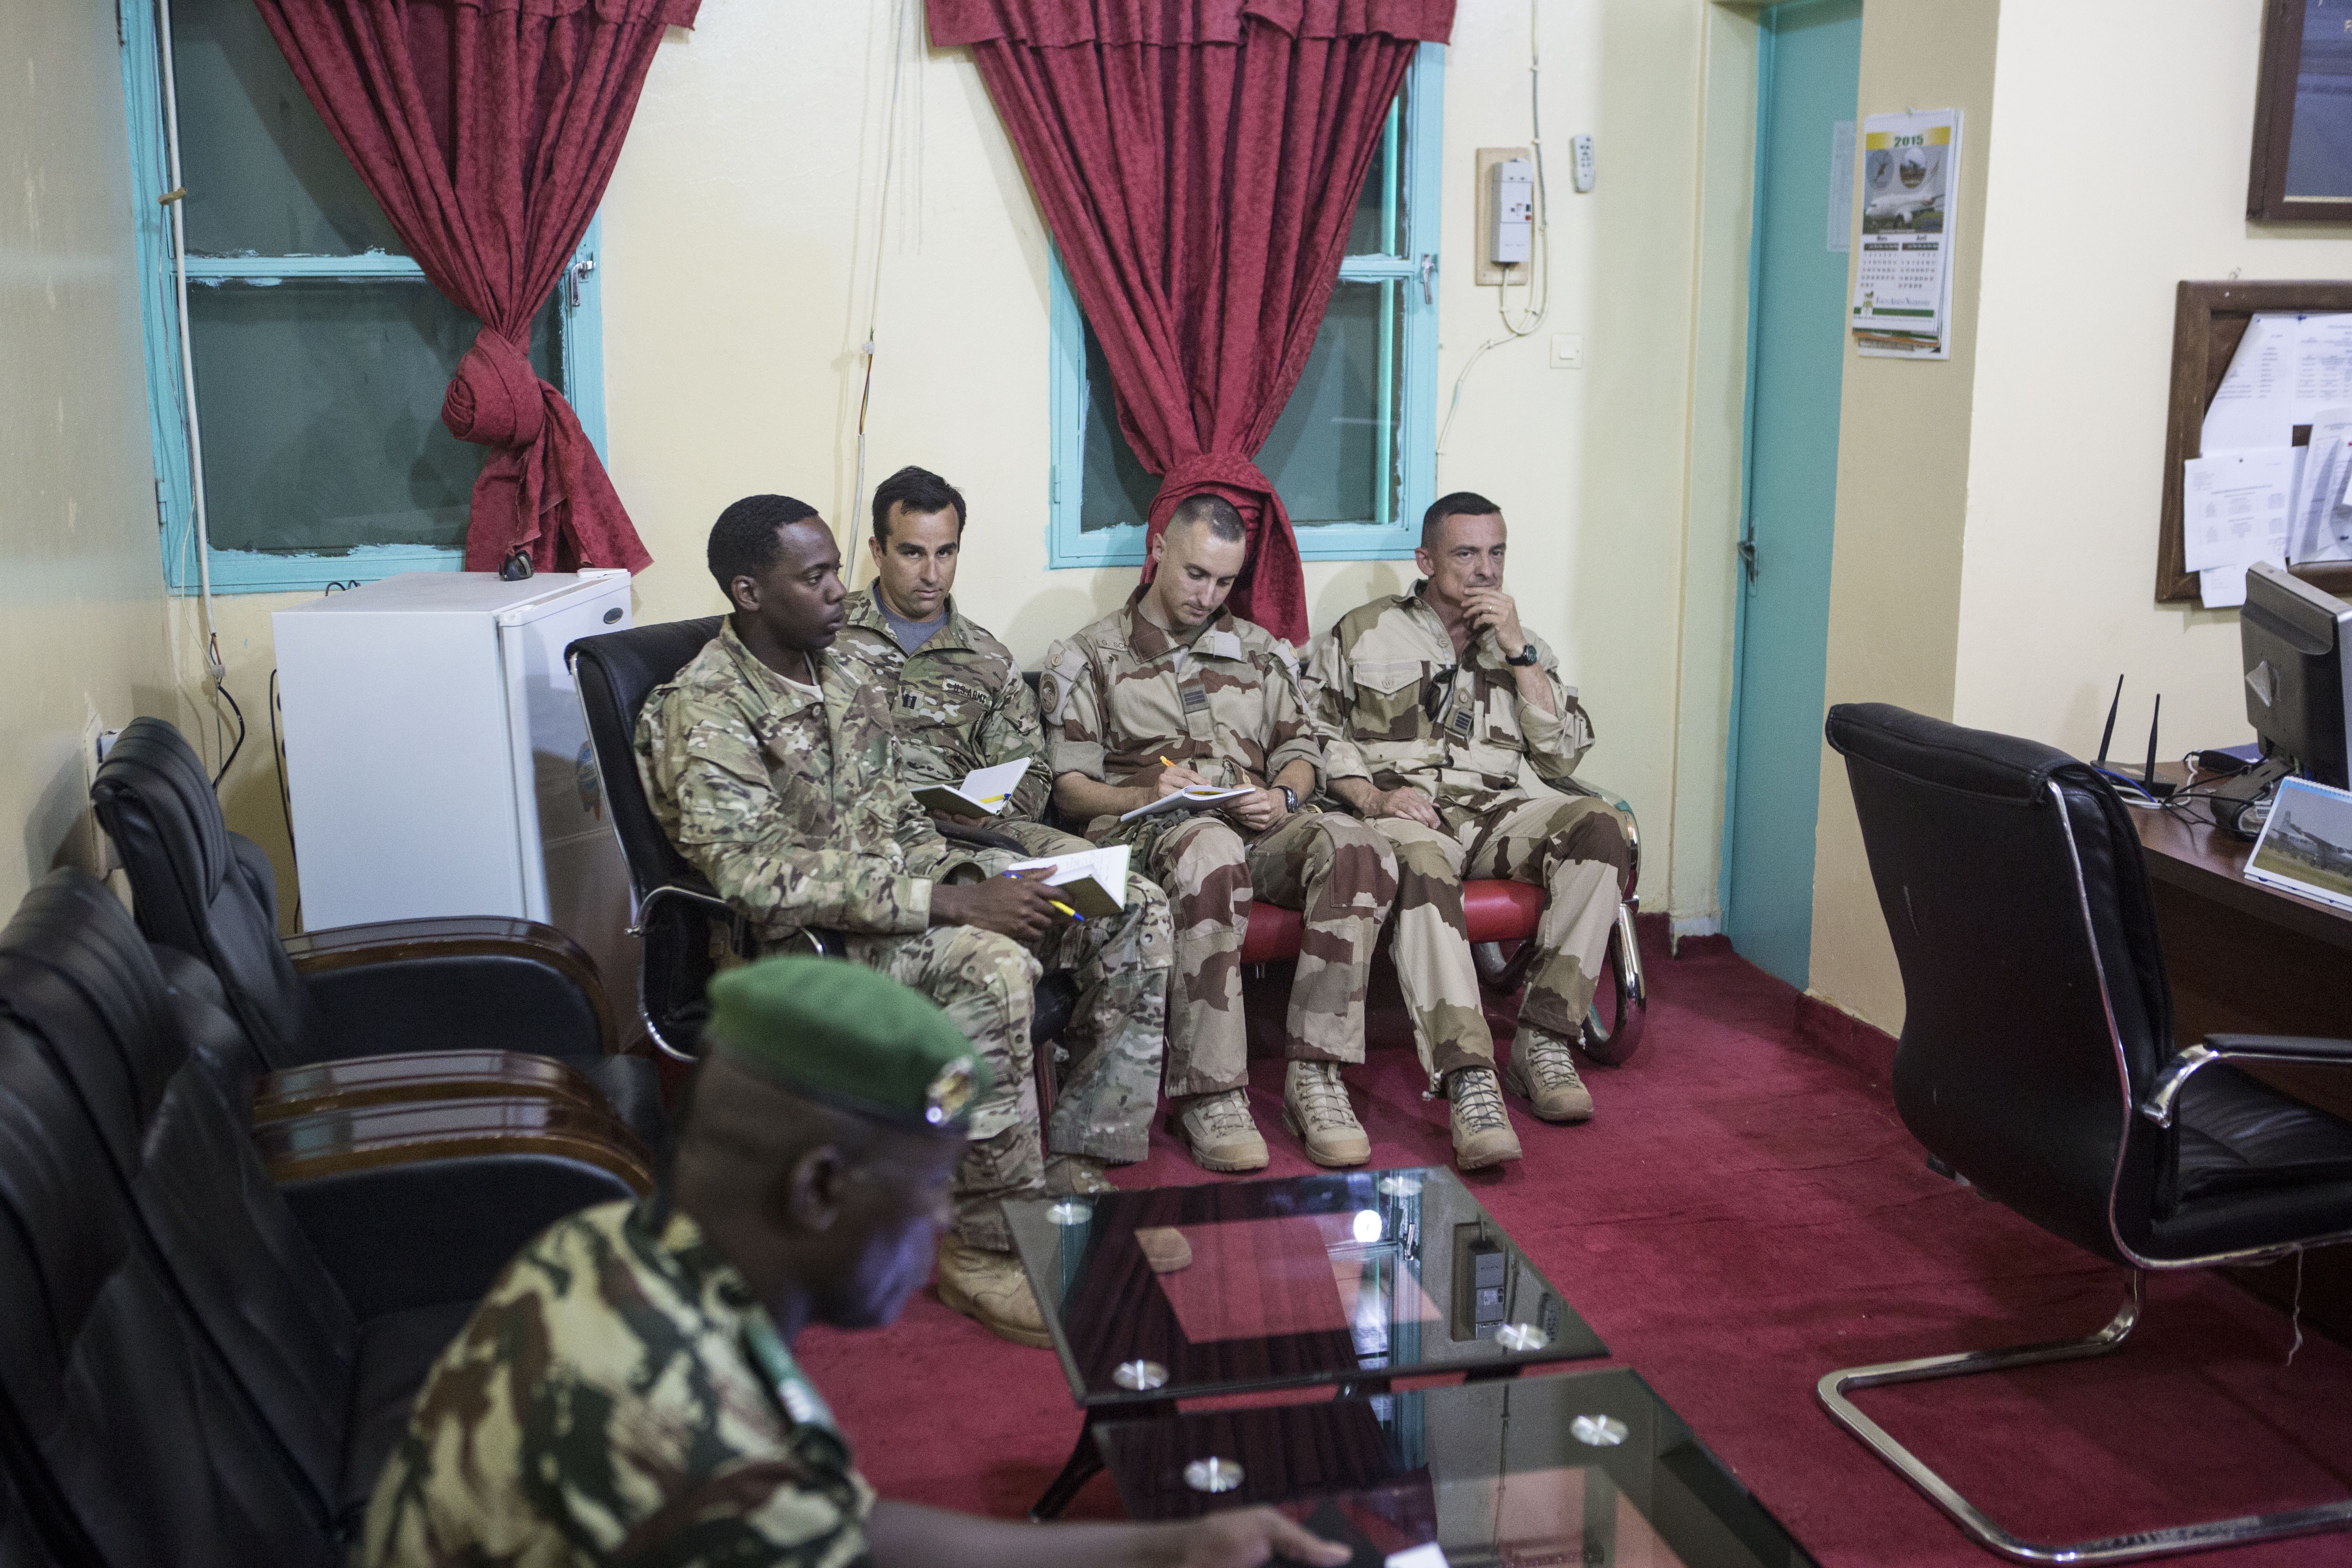 American and French soldiers attend a daily briefing with the Nigerien military commander in charge of the fight against Boko Haram at a Nigerien military base in Diffa, Niger, March 26, 2015. Image by Joe Penney. Niger, 2015.